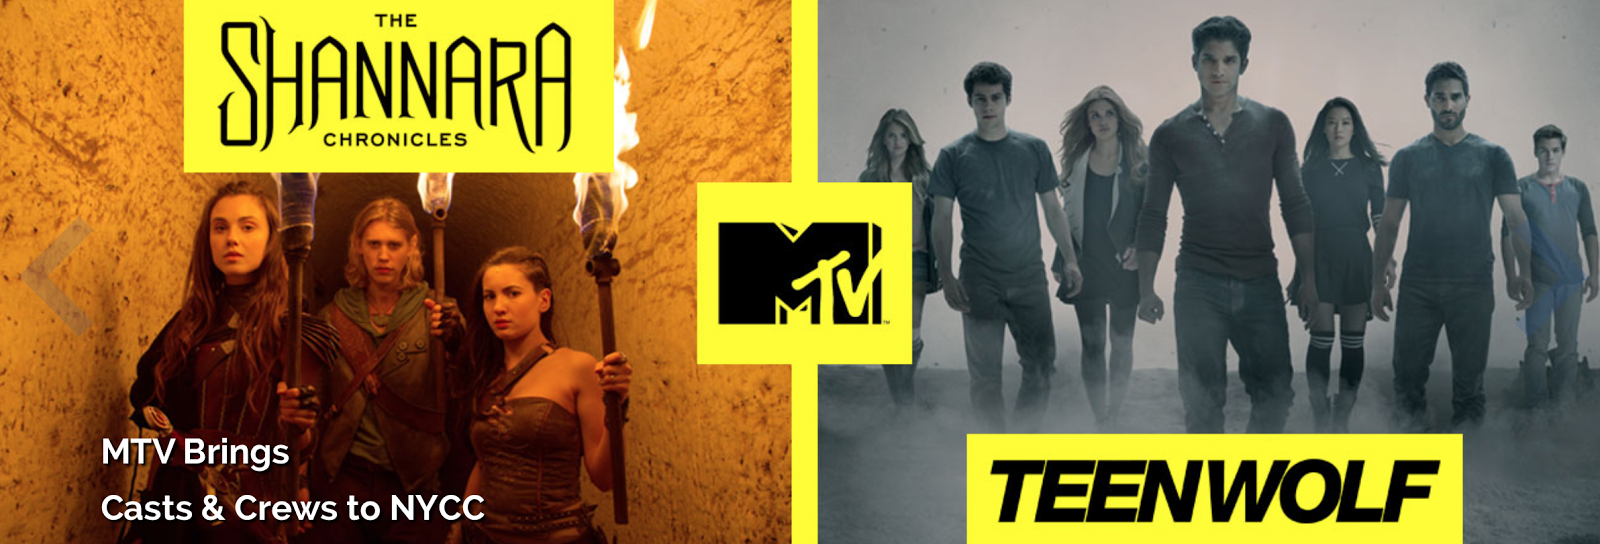 Teen Wolf and The Shannara Chronicles Attending NYCC 2015